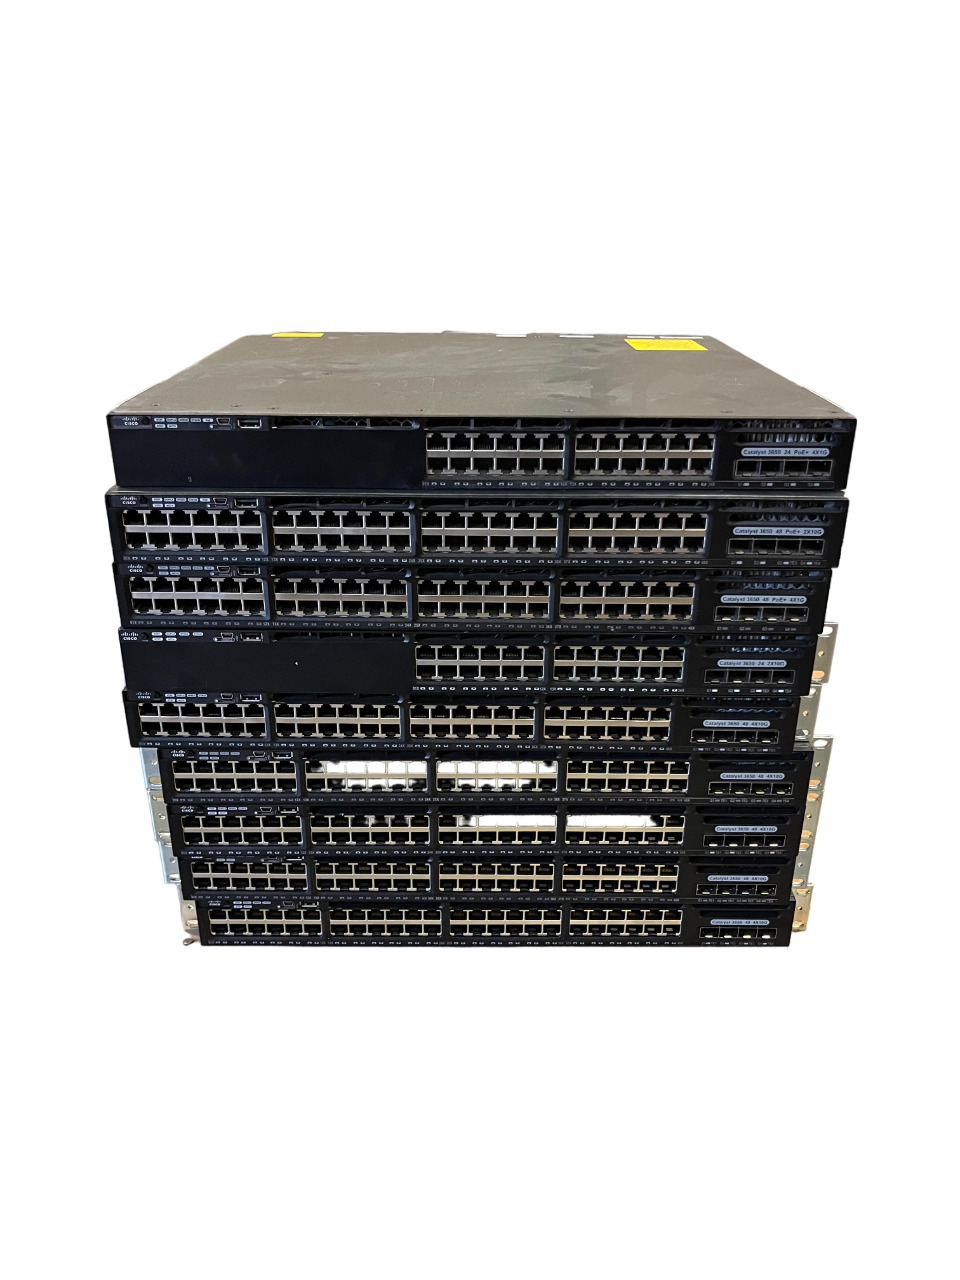 9x Cisco Catalyst 3650 Series 24 & 48 Port Ethernet Switches Lot of 9